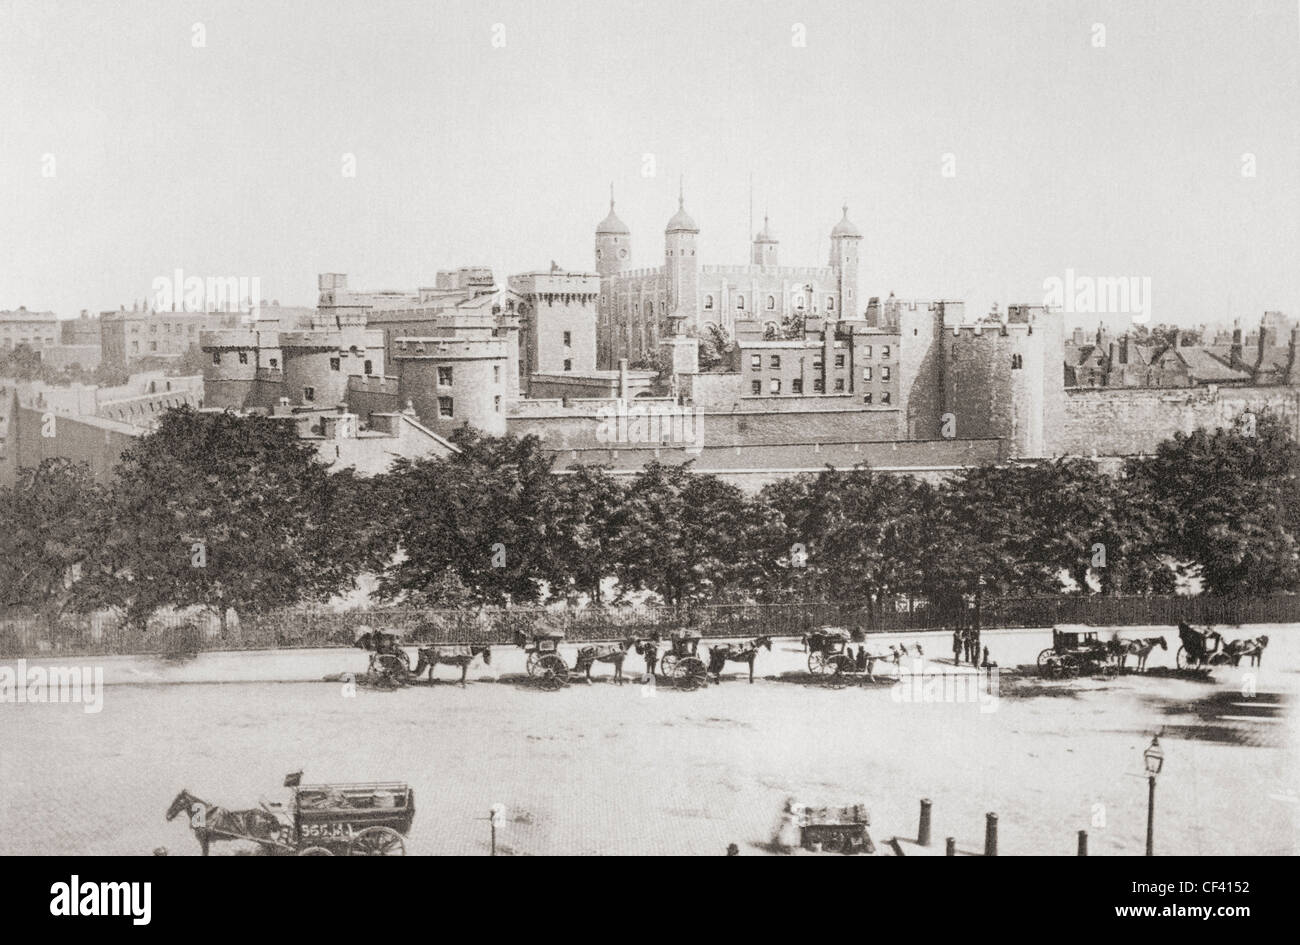 Her Majesty's Royal Palace and Fortress, known as the Tower of London, London, England, in the late 19th century. Stock Photo